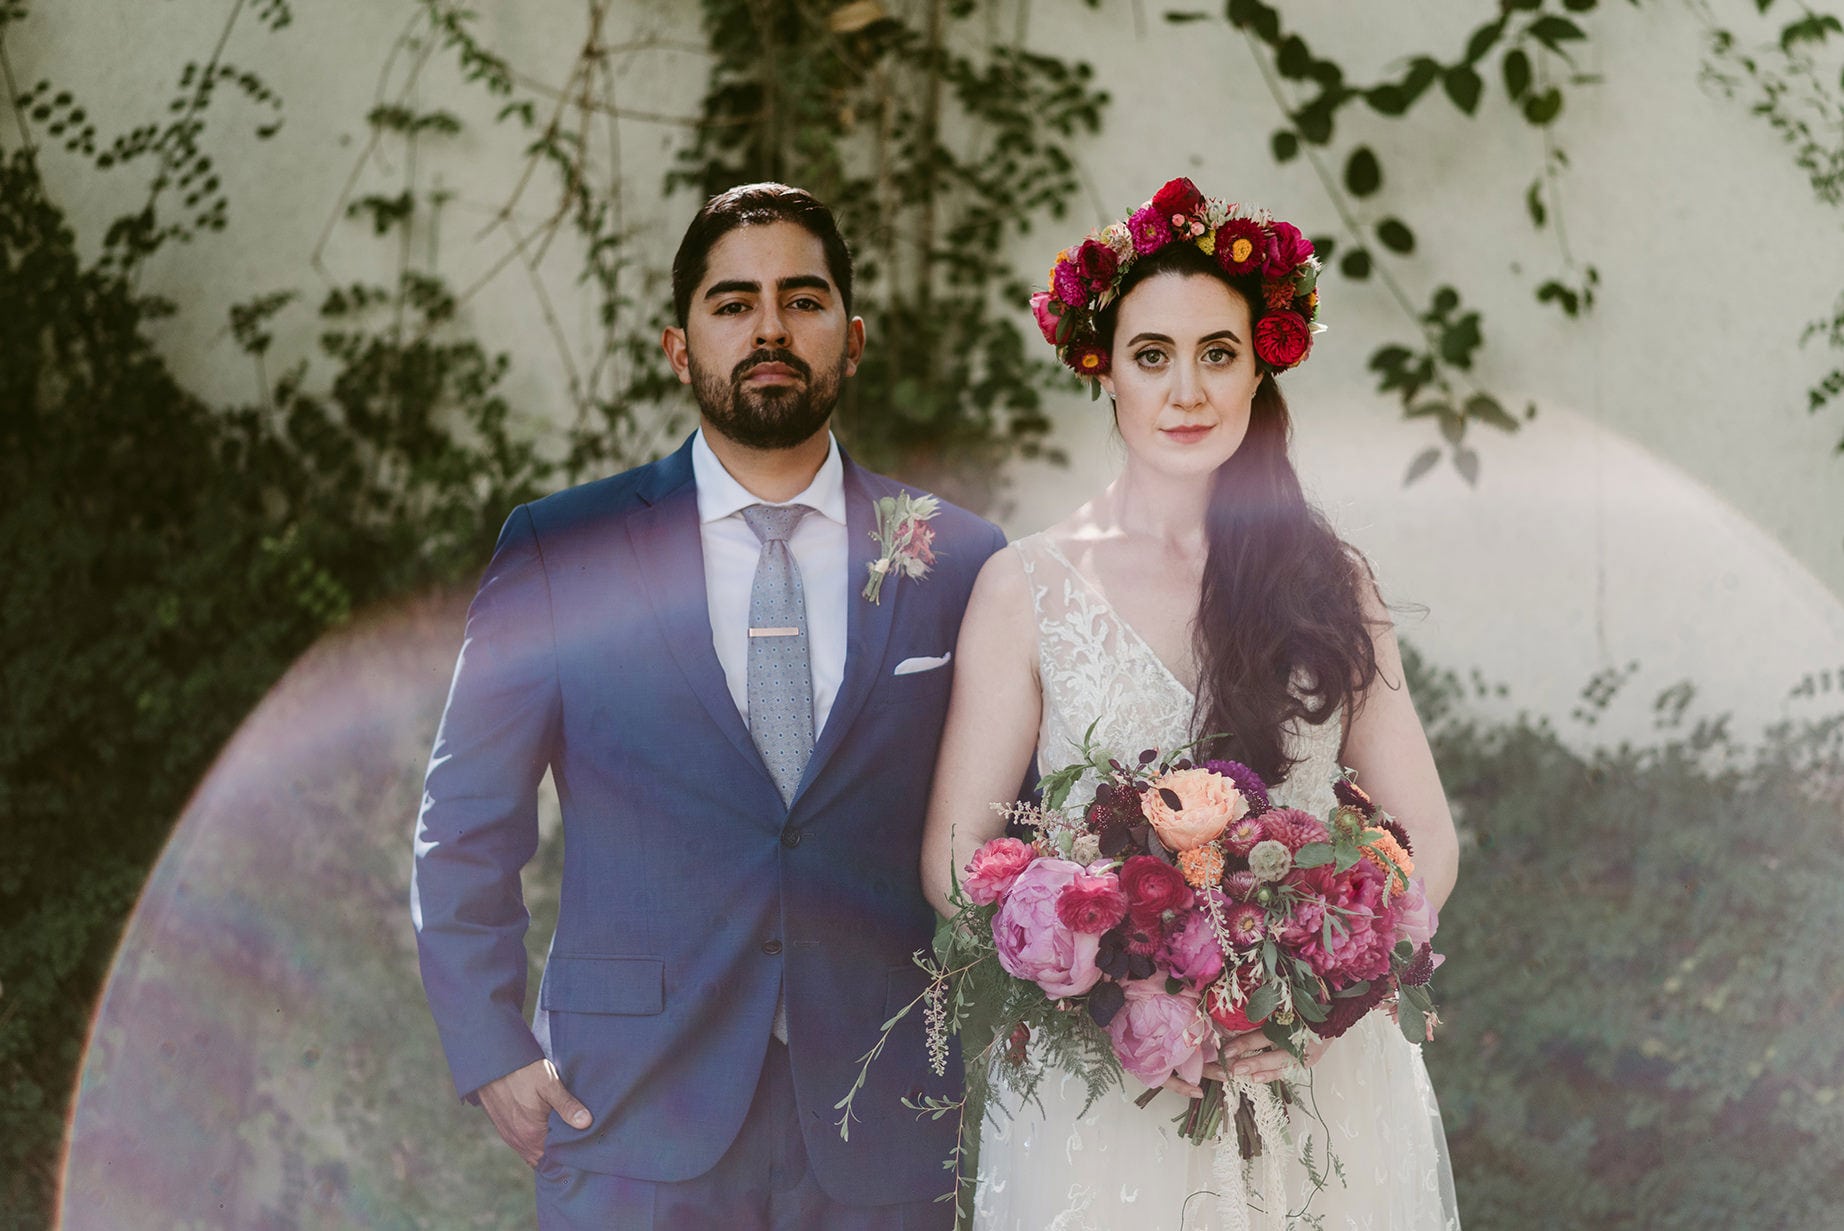 A Julie Pepin photo depicting a wedding couple. A groom wears a blue suit and tie, and a bride is in a white gown with a lace illustion neckline and a dark pink and yellow flower crown and bouquet.